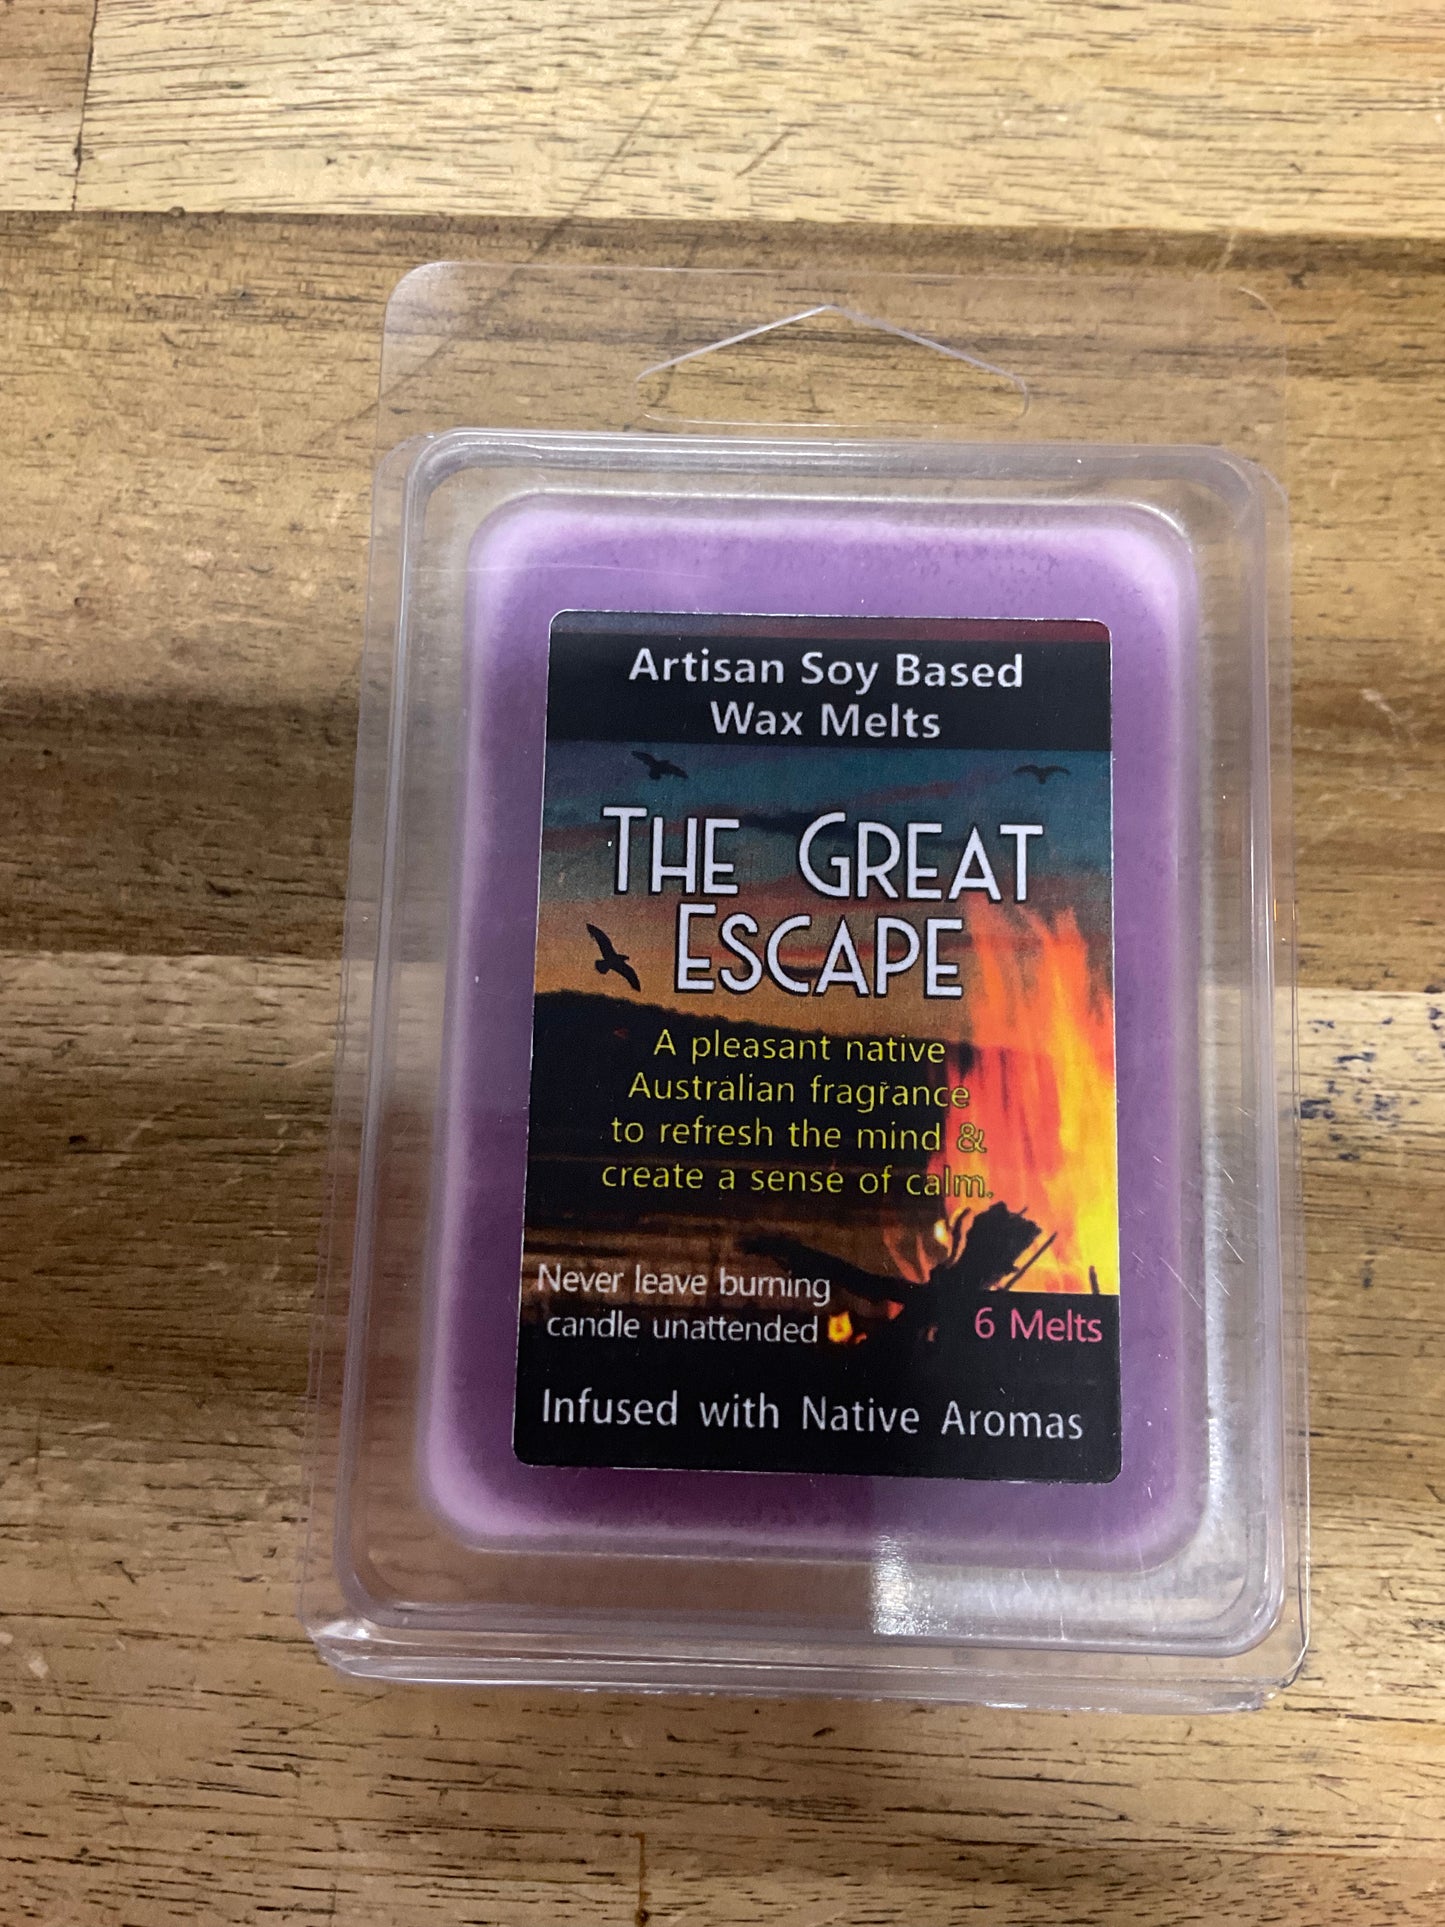 Wax Melts - The Great Escape